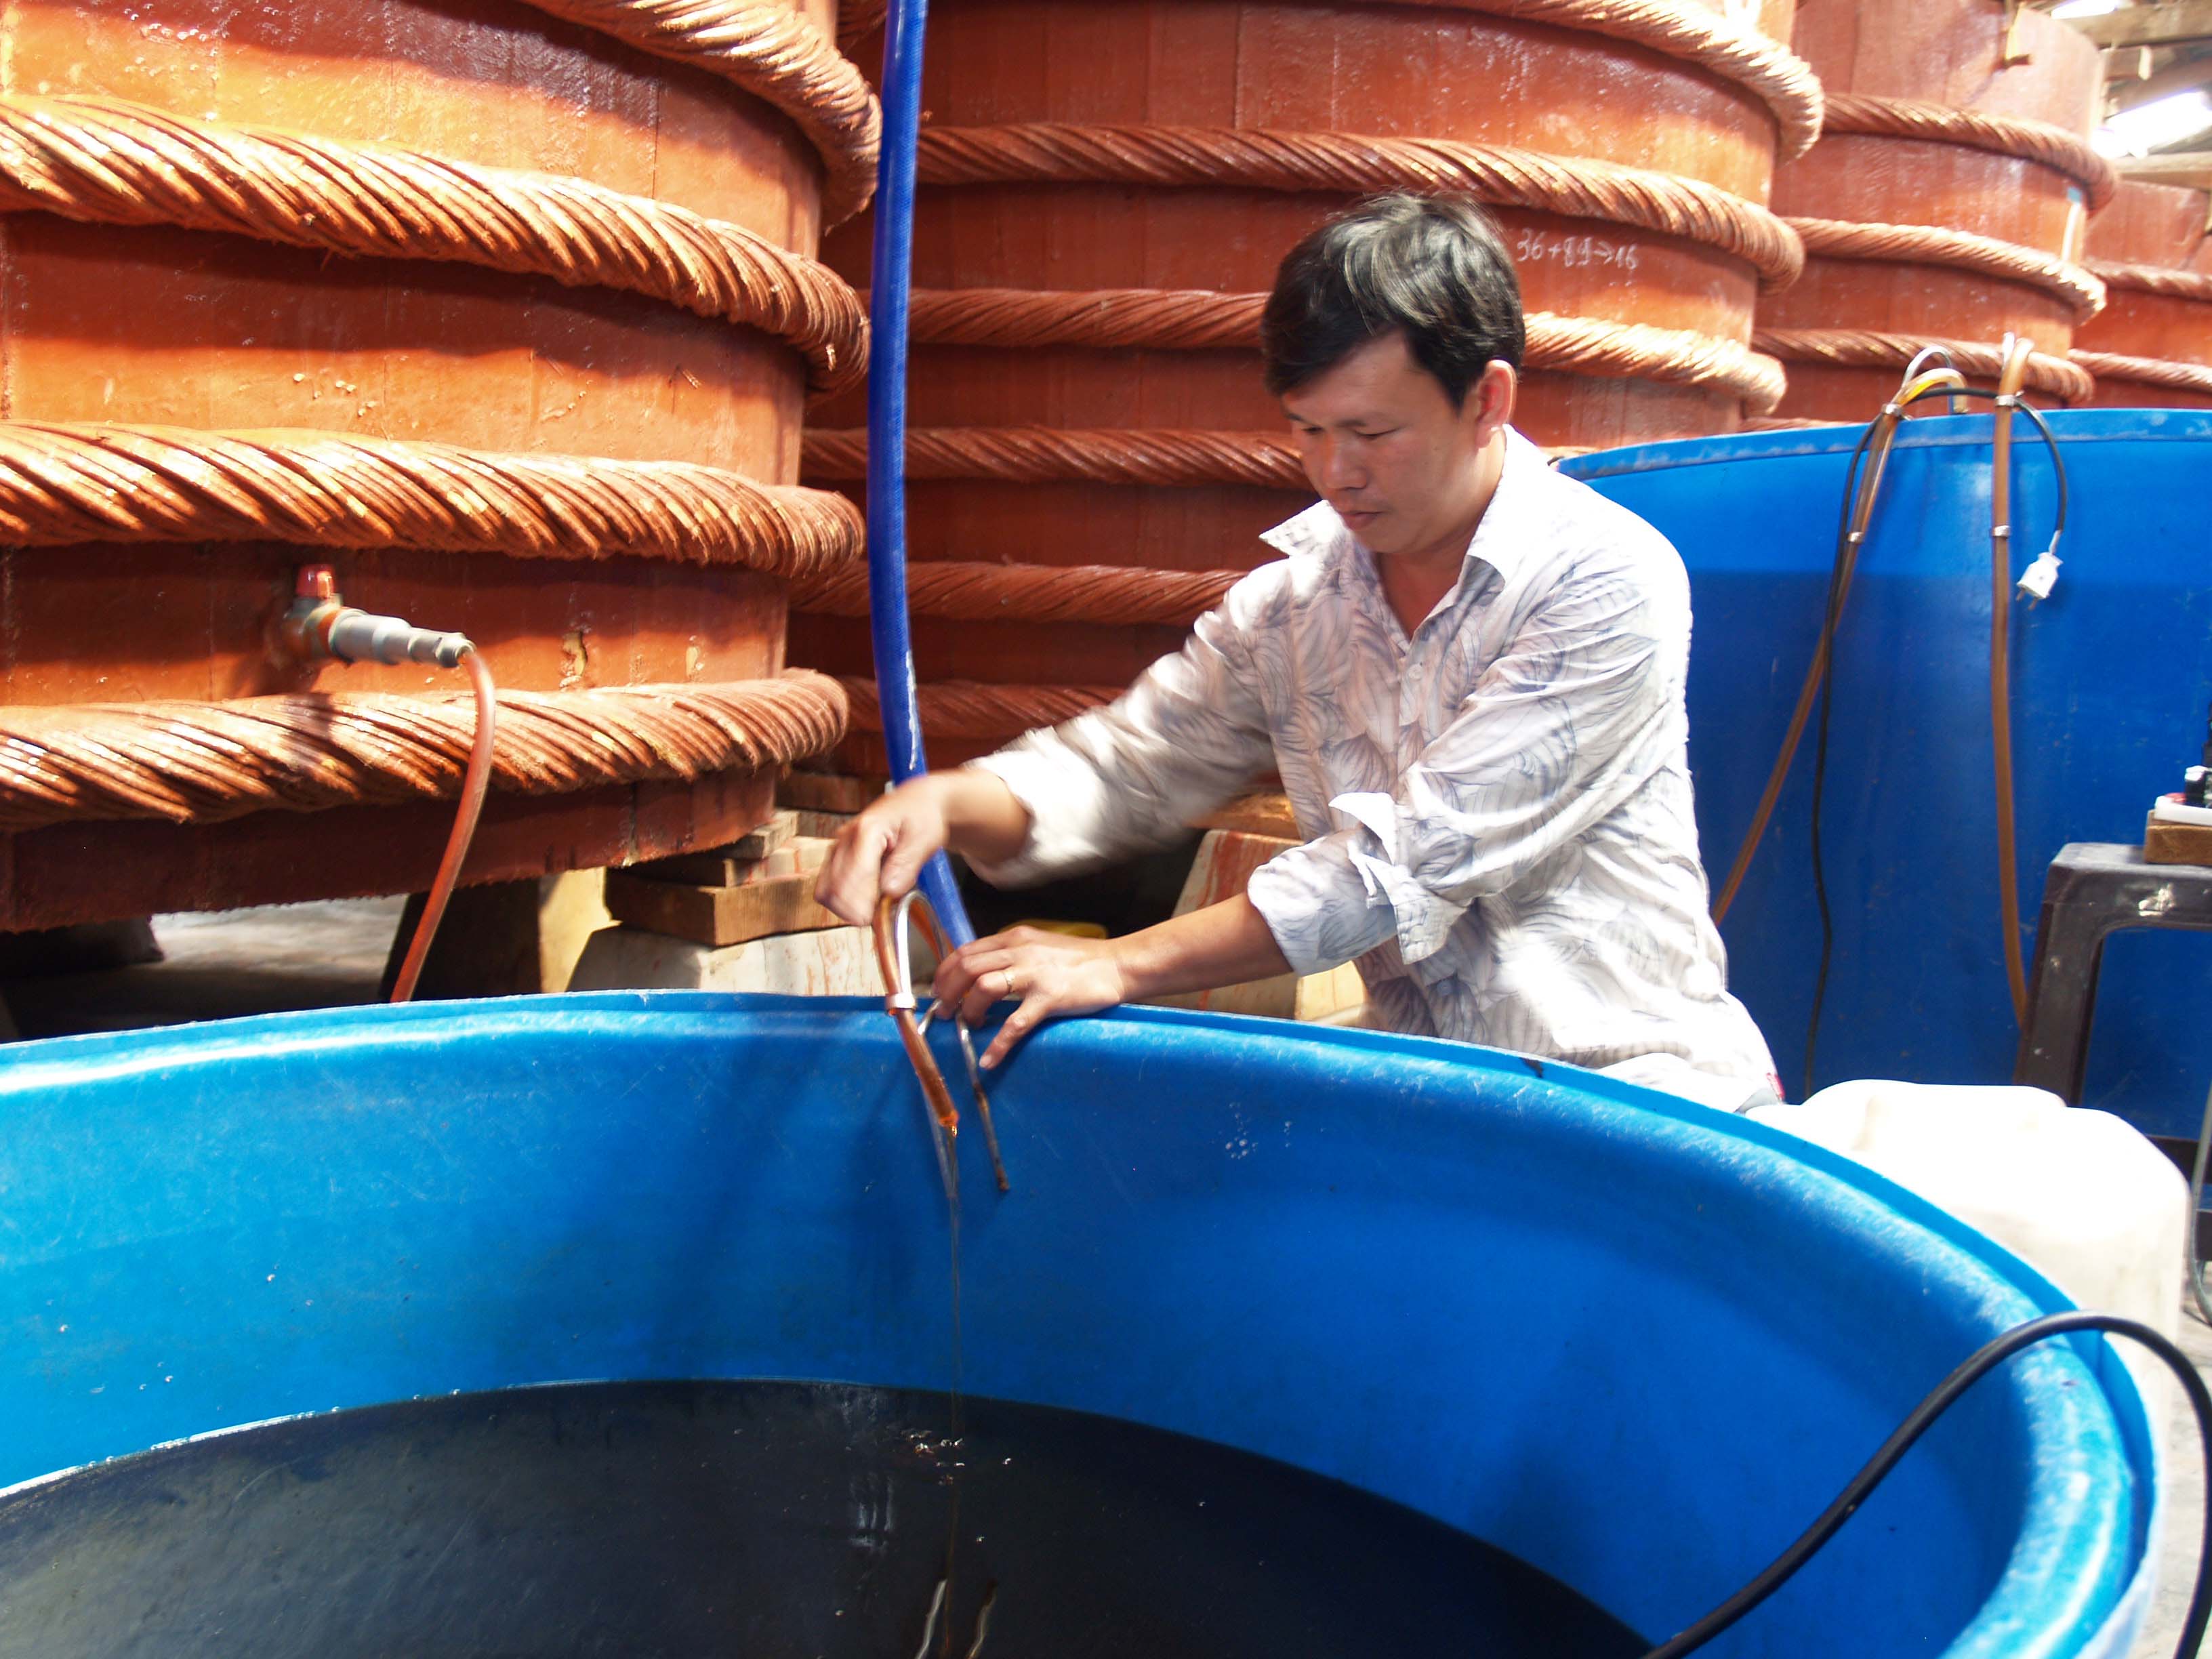 Vietnam association to be inspected over controversial fish sauce survey